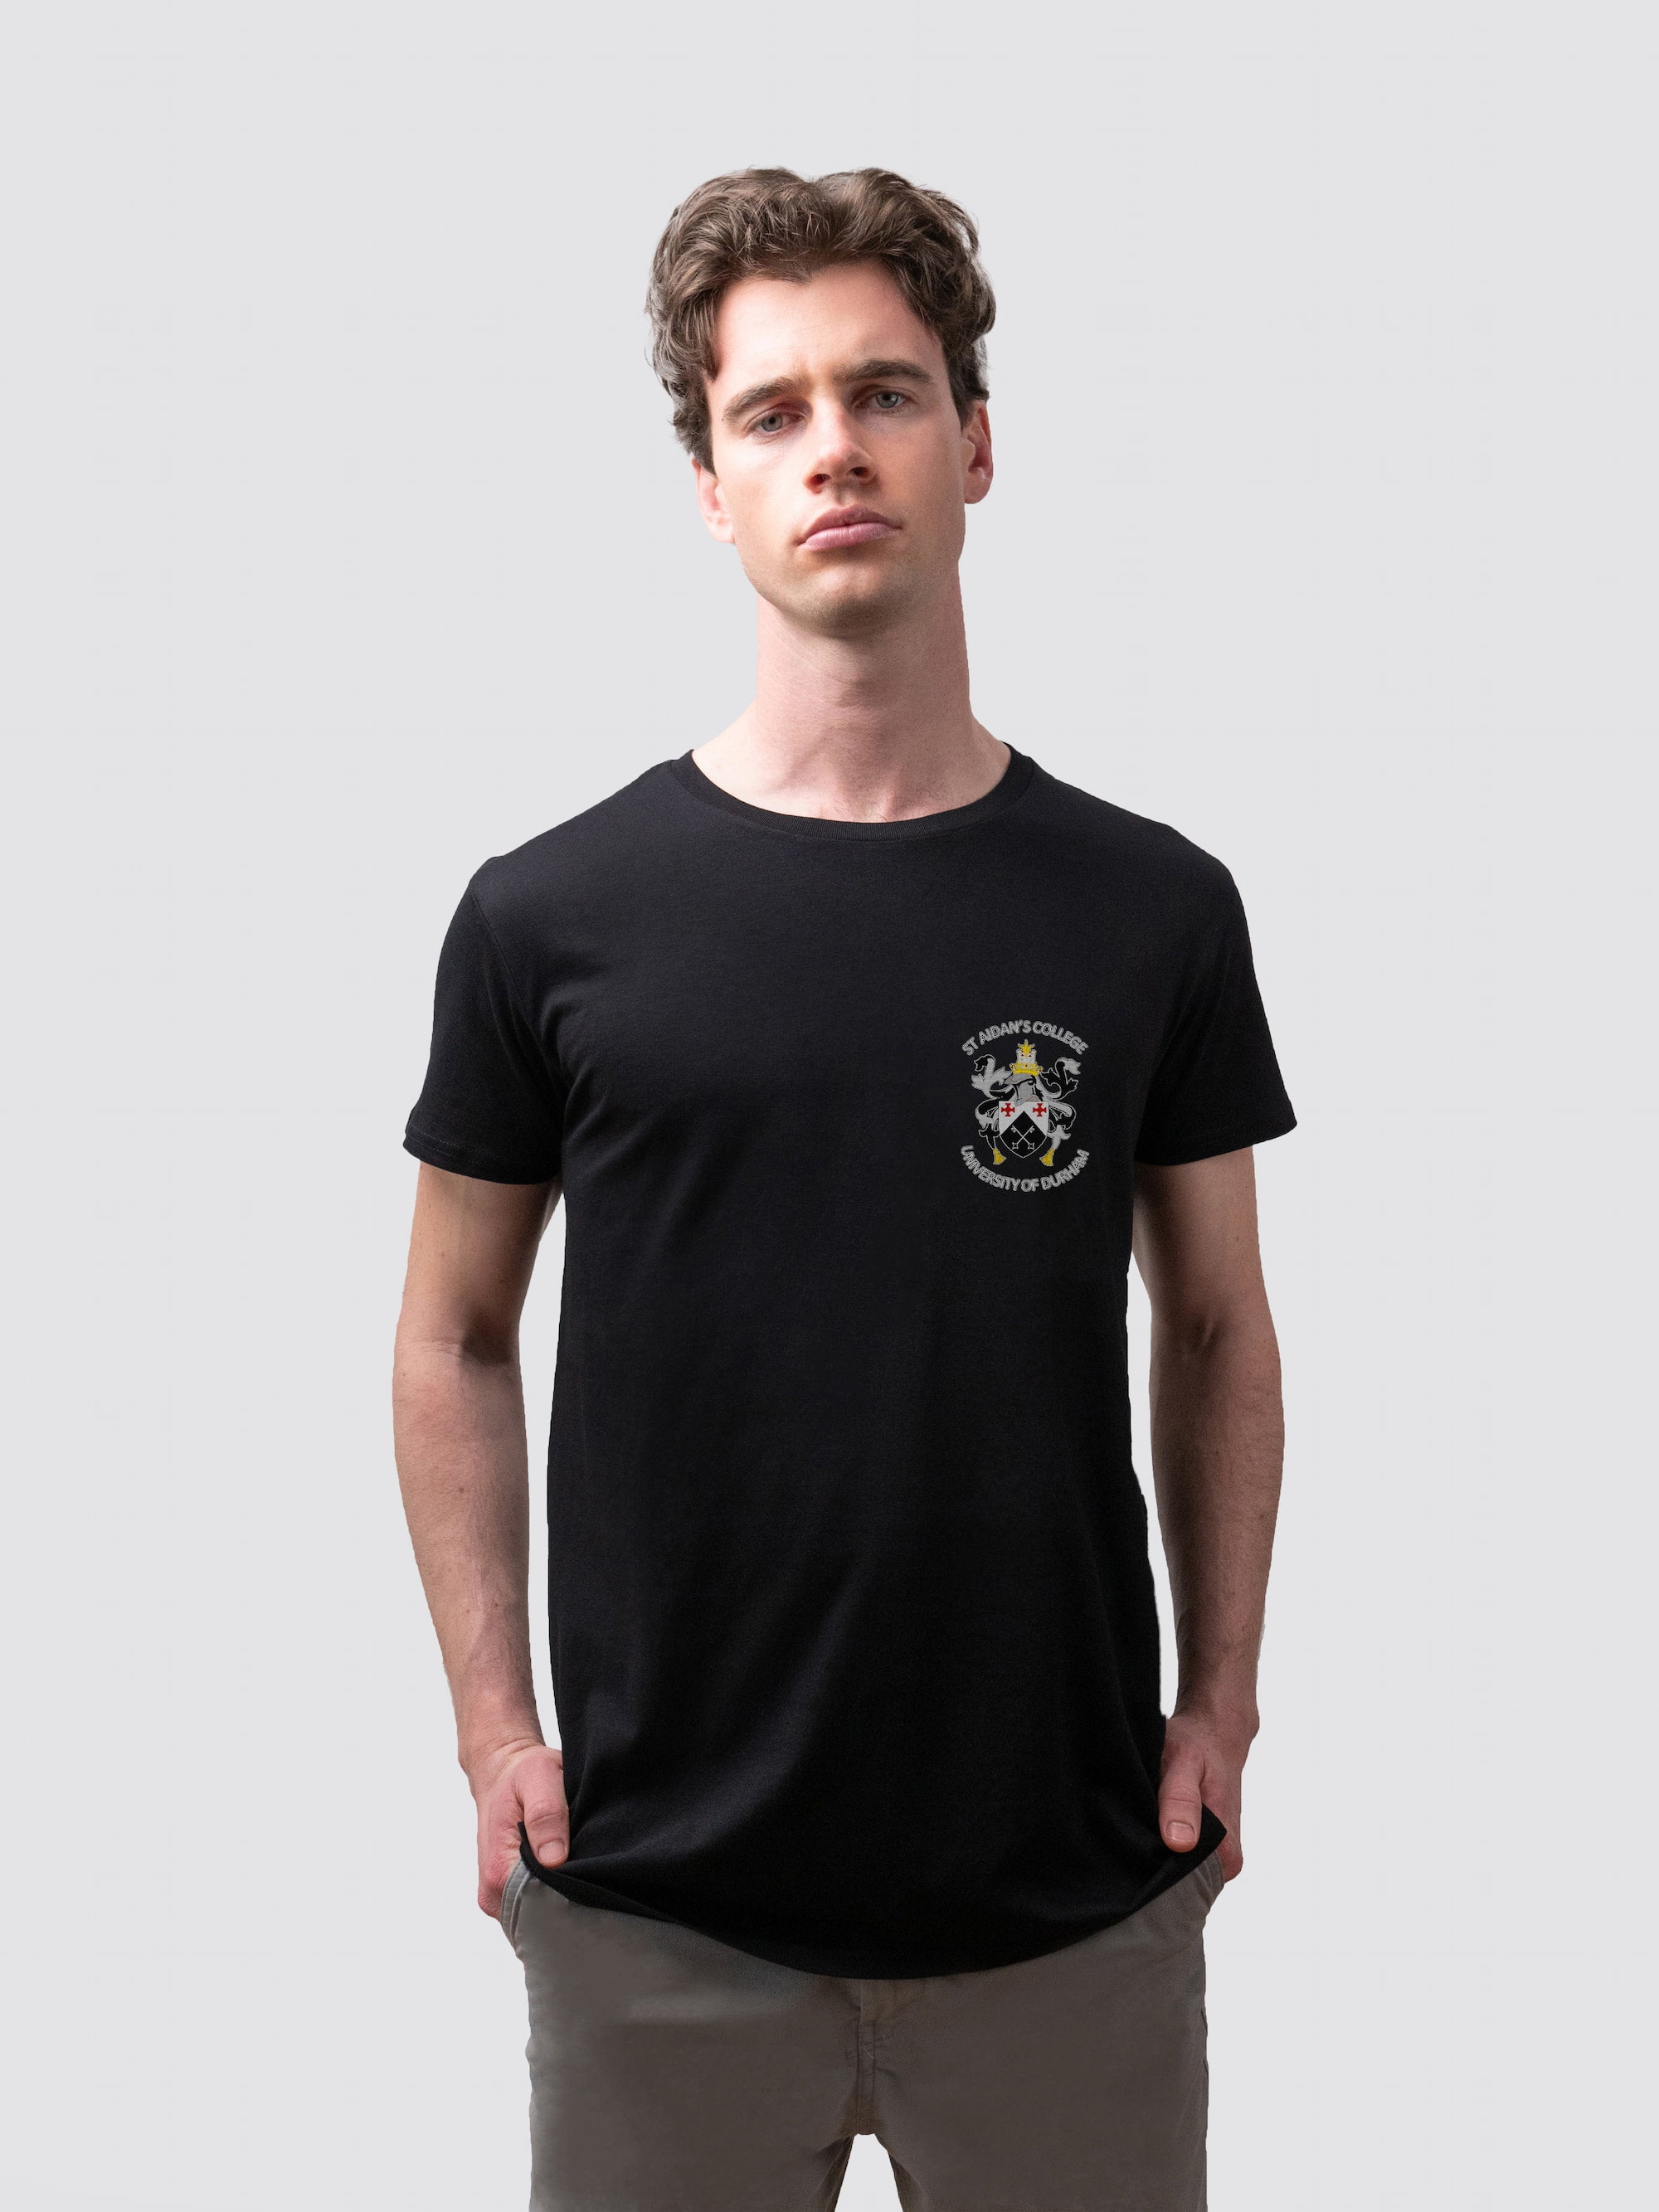 Sustainable St Aidan's t-shirt, made from organic cotton